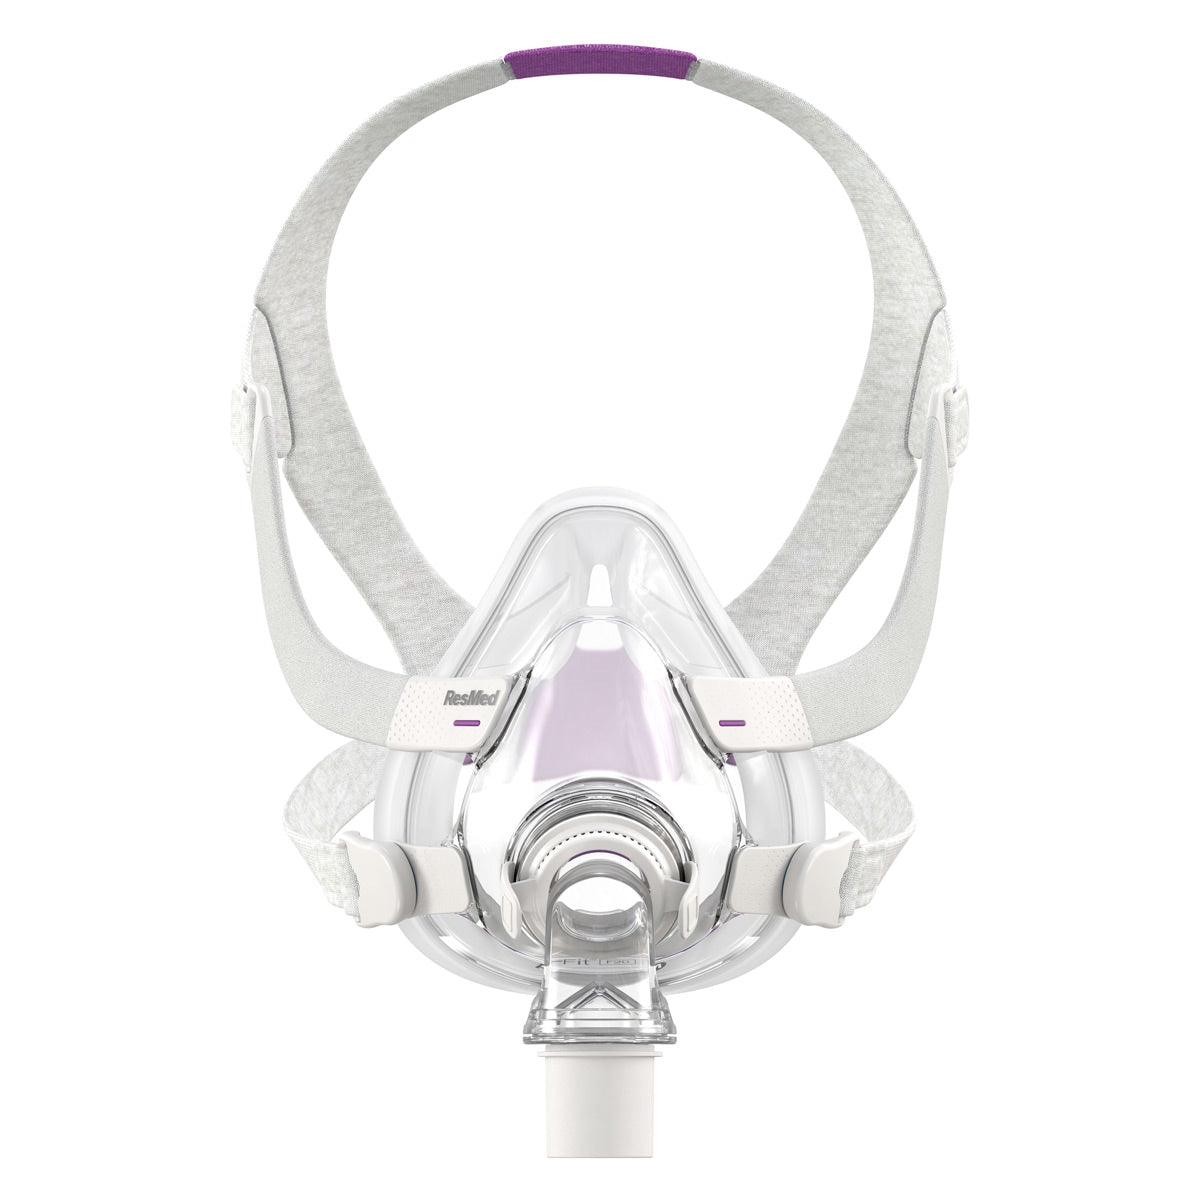 AirFit F20 for Her Full Face CPAP/BiLevel Mask with Headgear